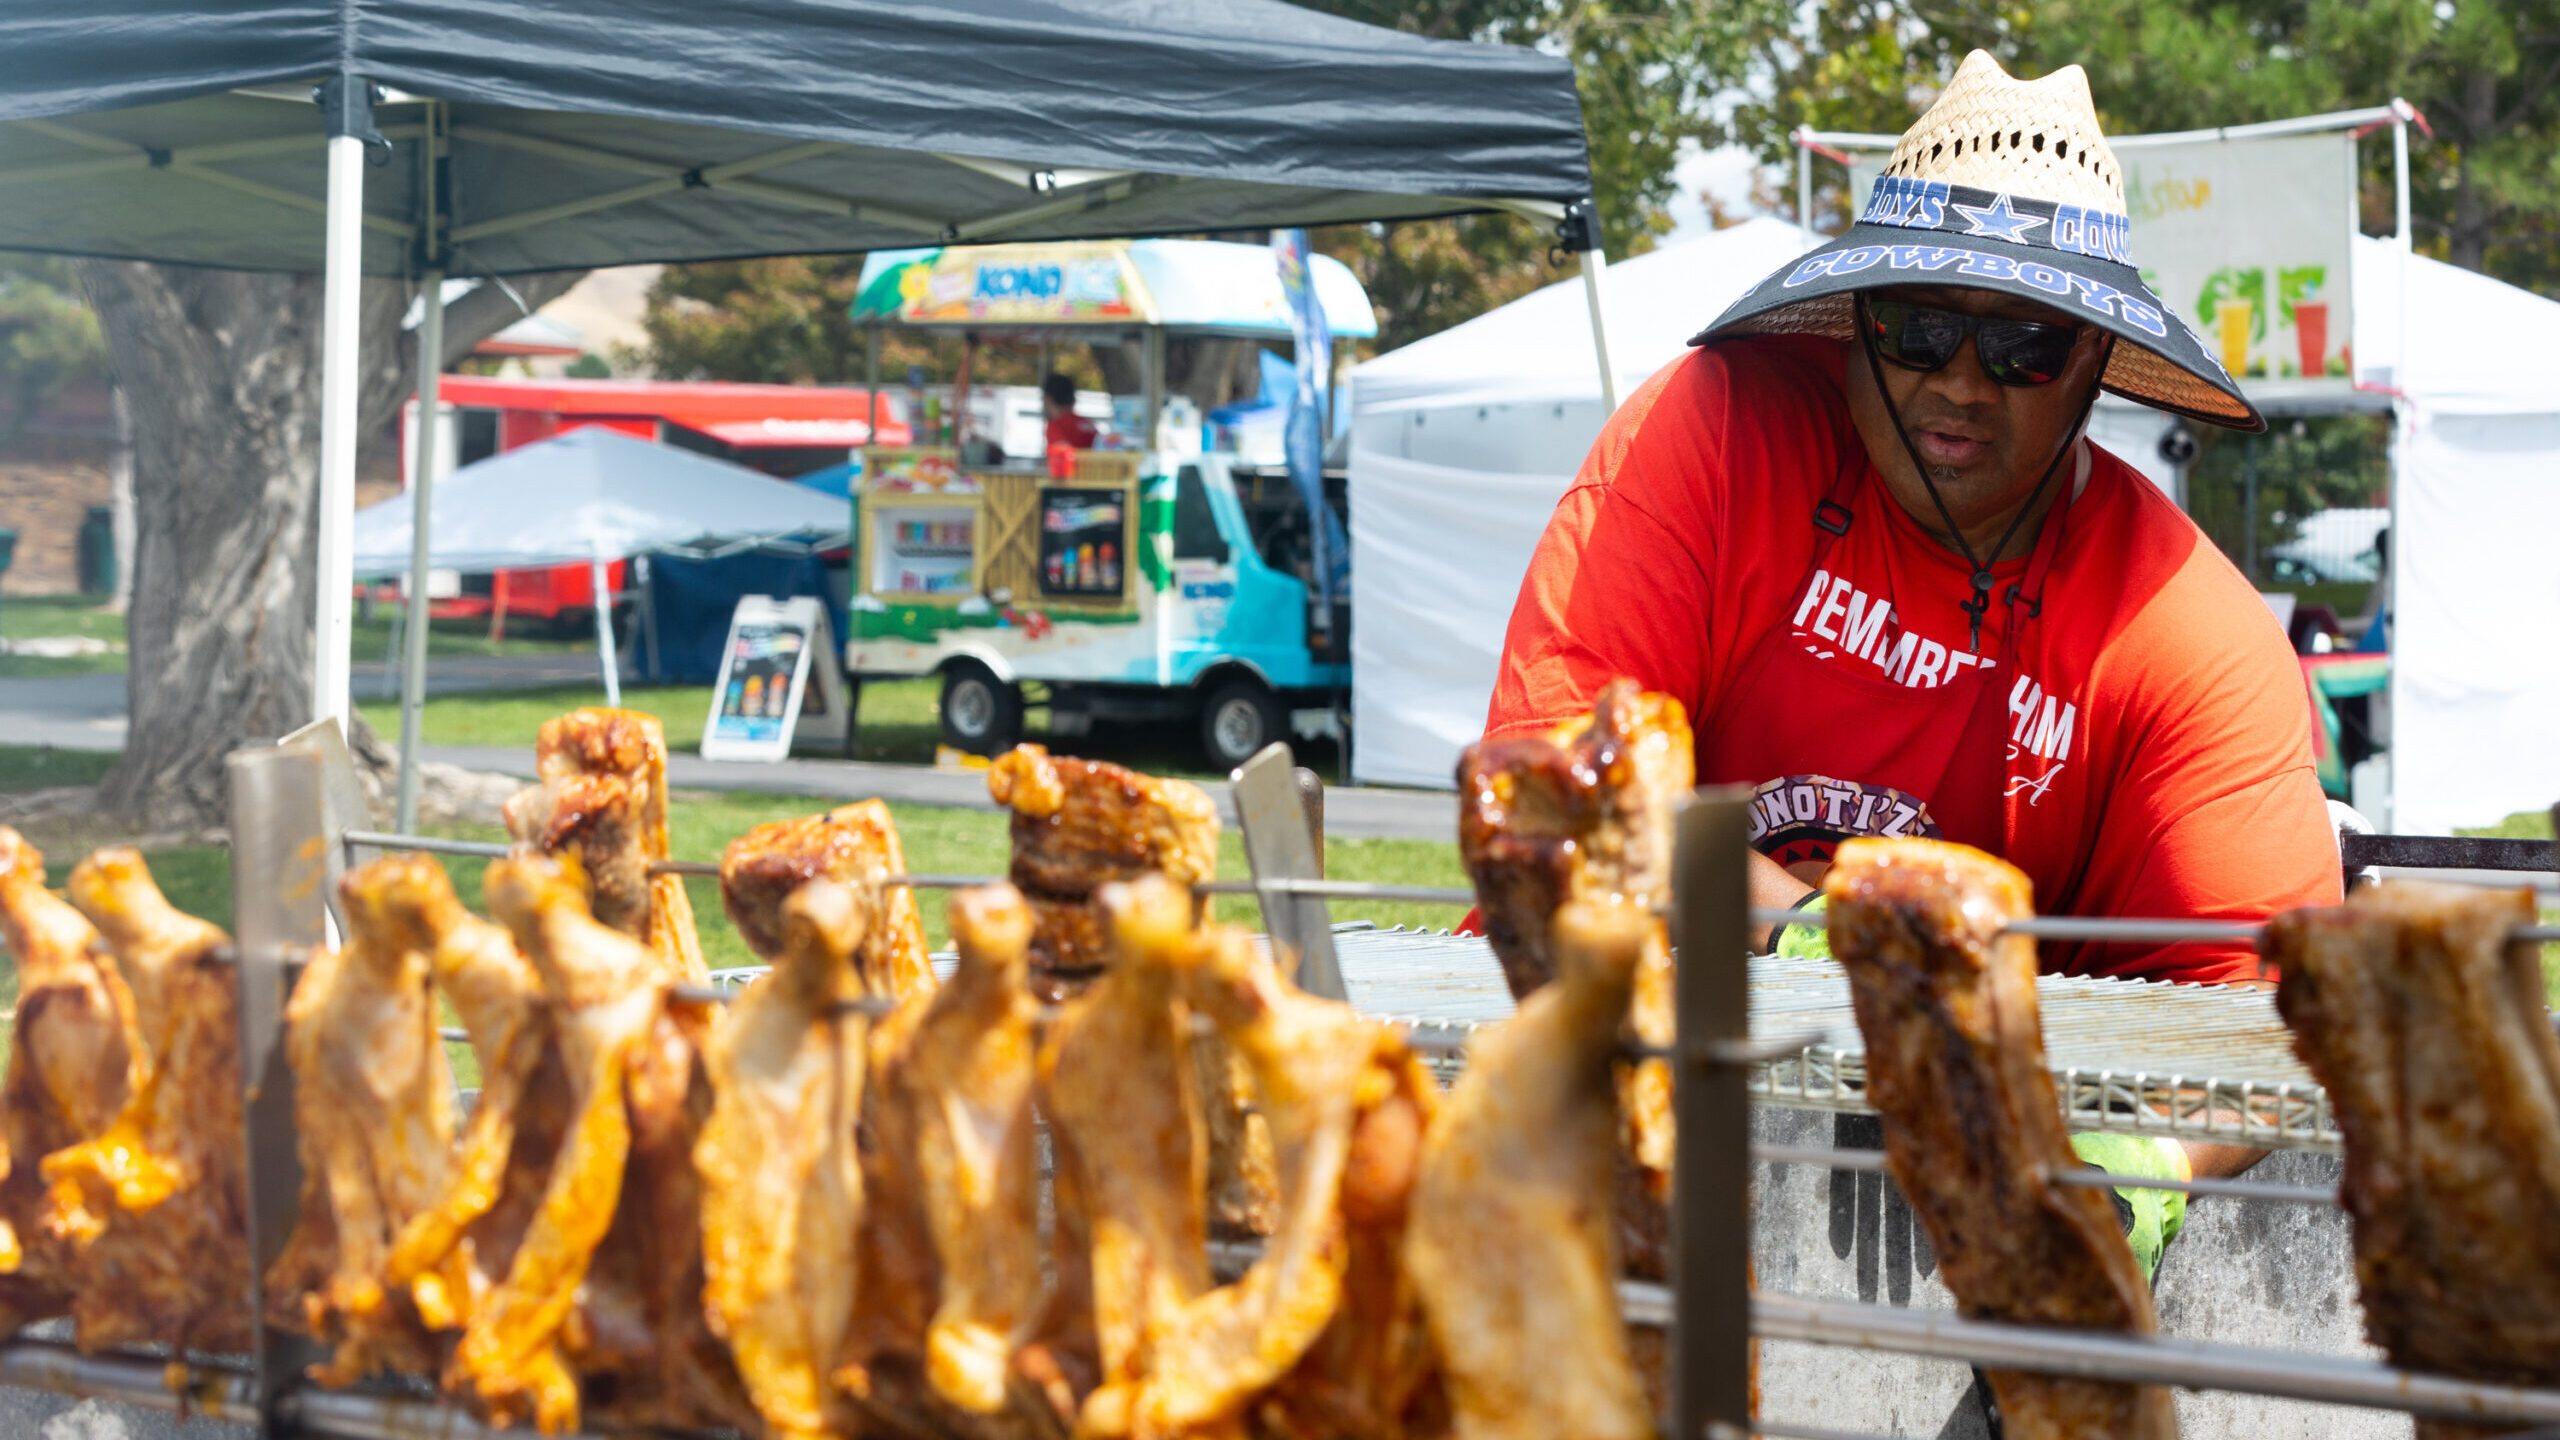 Kiwi Tui tends the coals under the meat at Foniti’z Fix food truck during Polynesian Days Utah at...